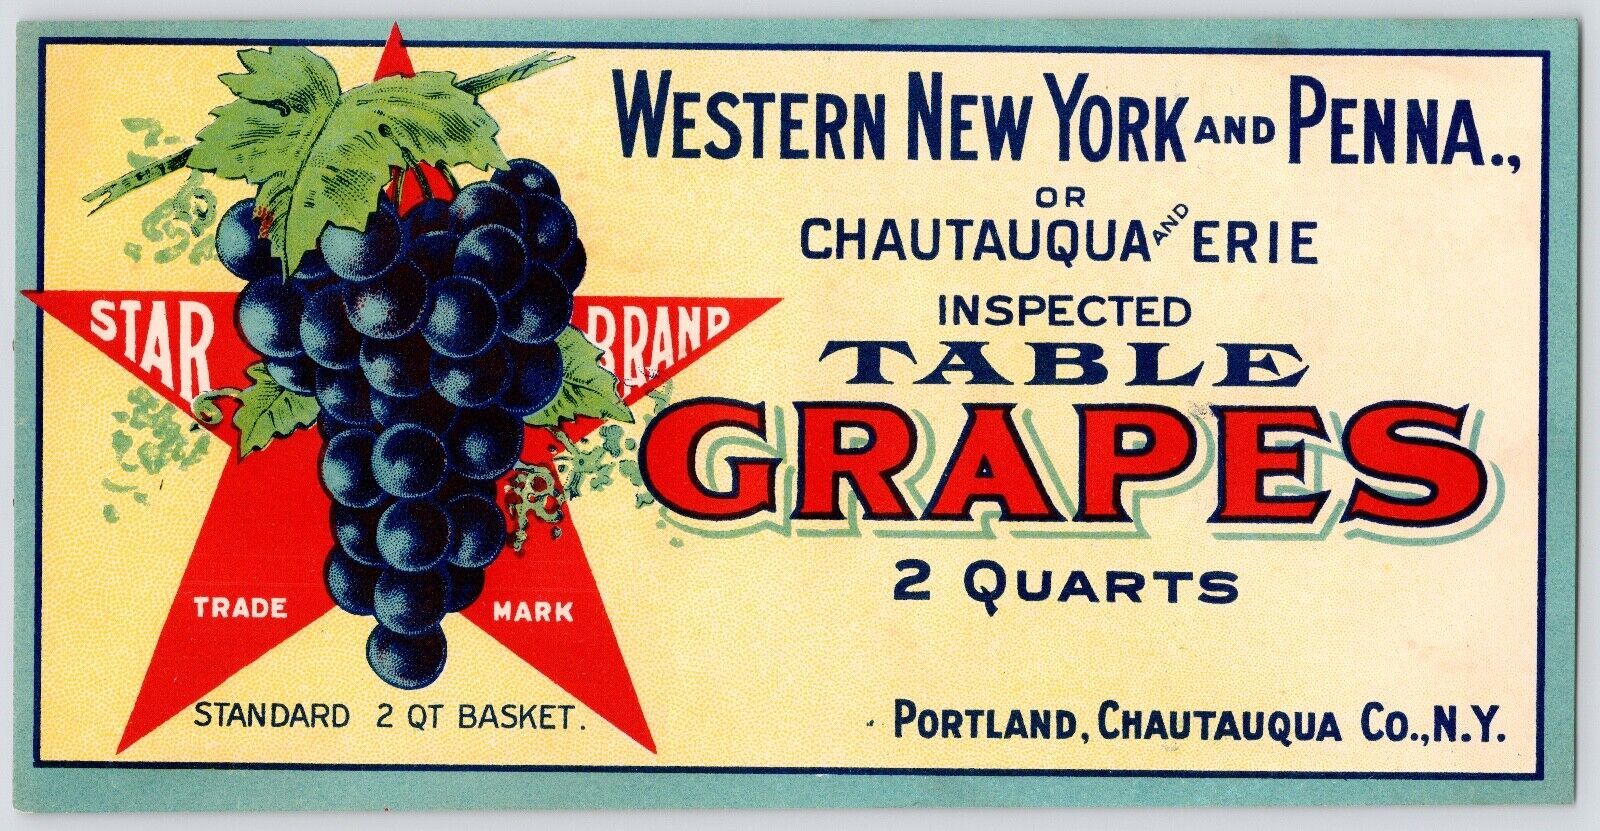 c1900s~Grapes Crate Label~Star Brand~Portland New York NY~Vintage Advertising